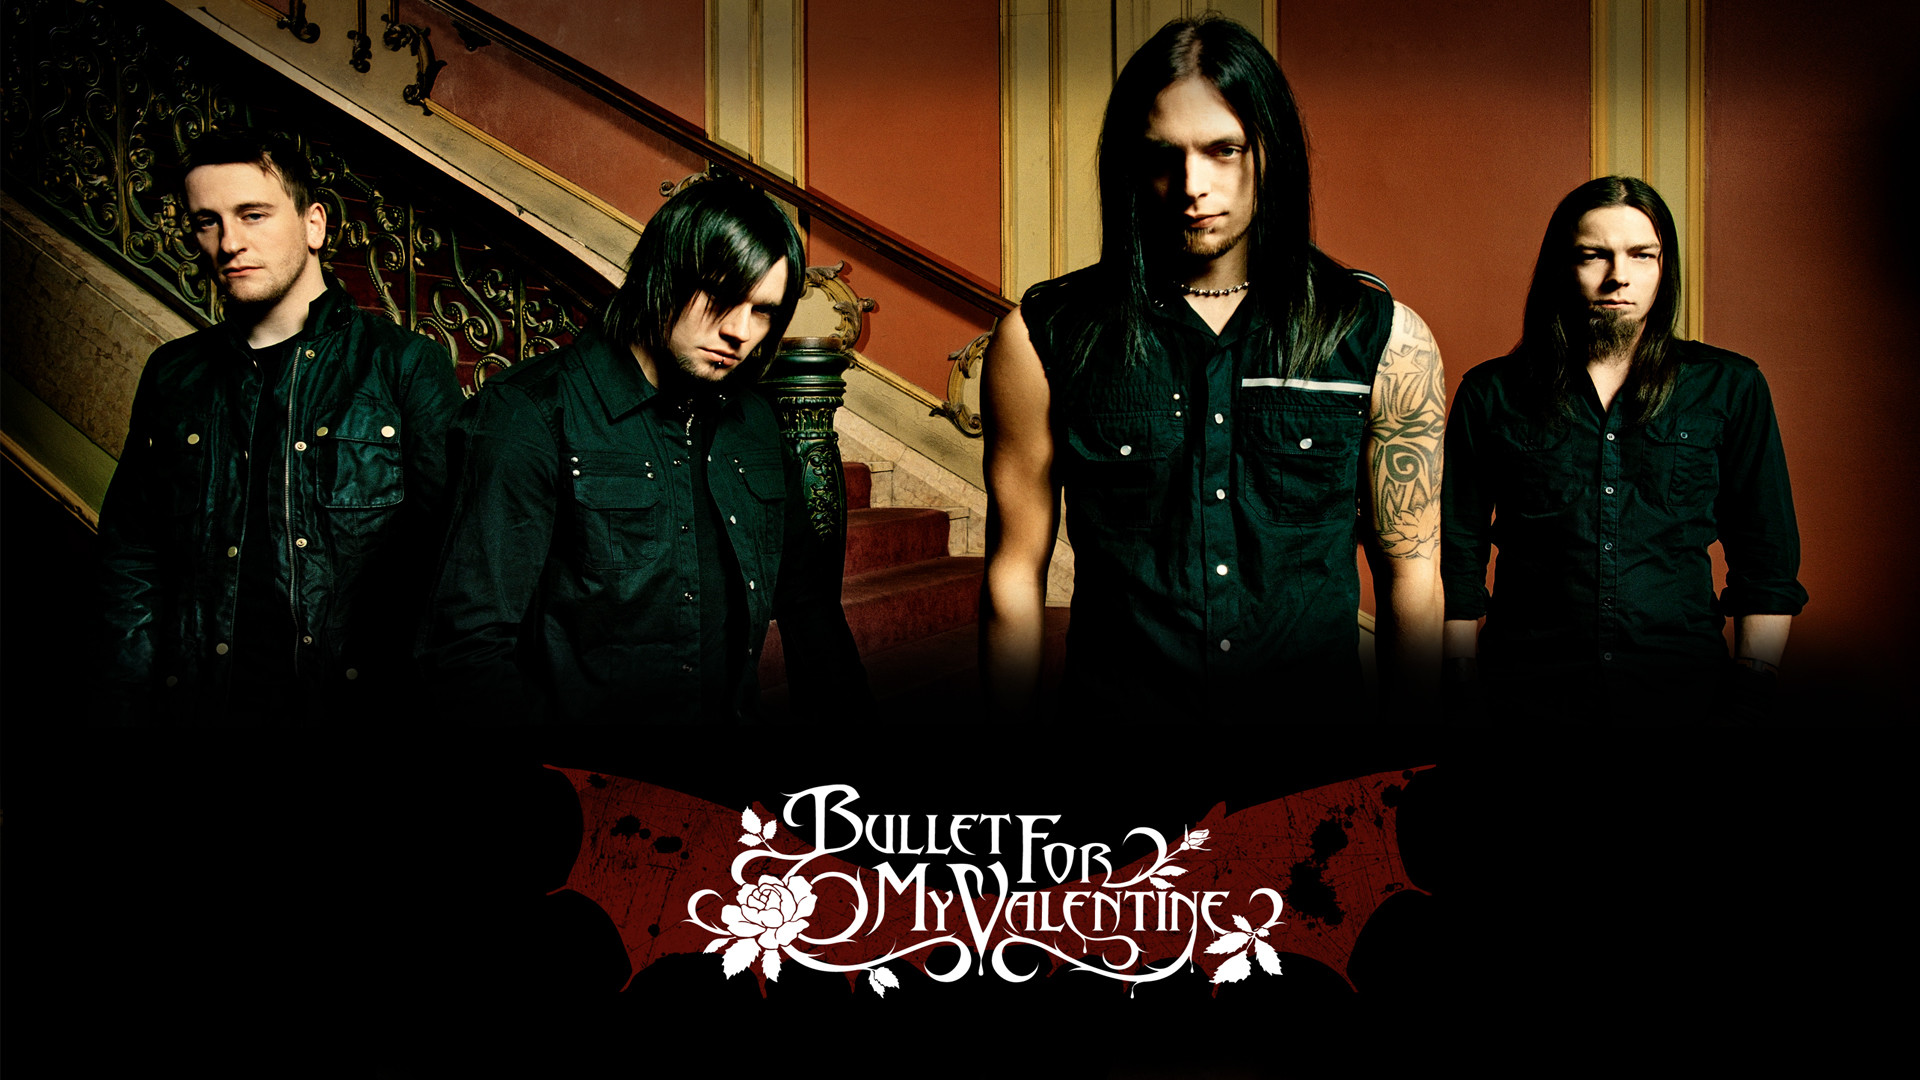 1920x1080 ... Bullet For My Valentine Wallpapers HD ...